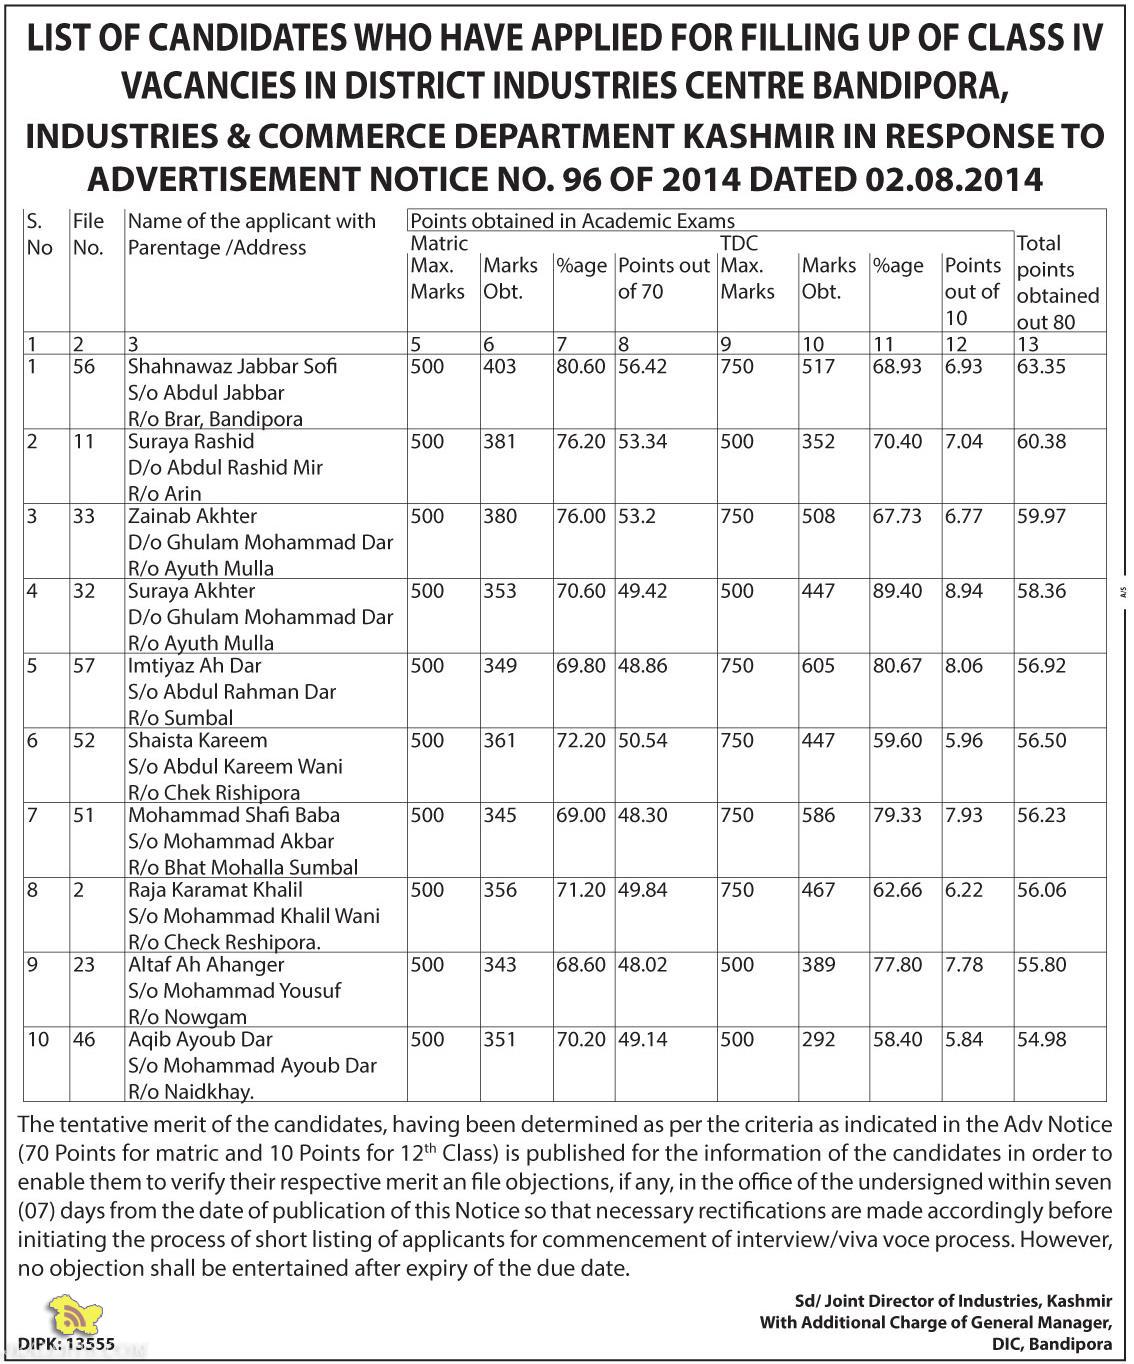 LIST OF CANDIDATES APPLIED FOR CLASS IV VACANCIES IN DISTRICT INDUSTRIES CENTRE